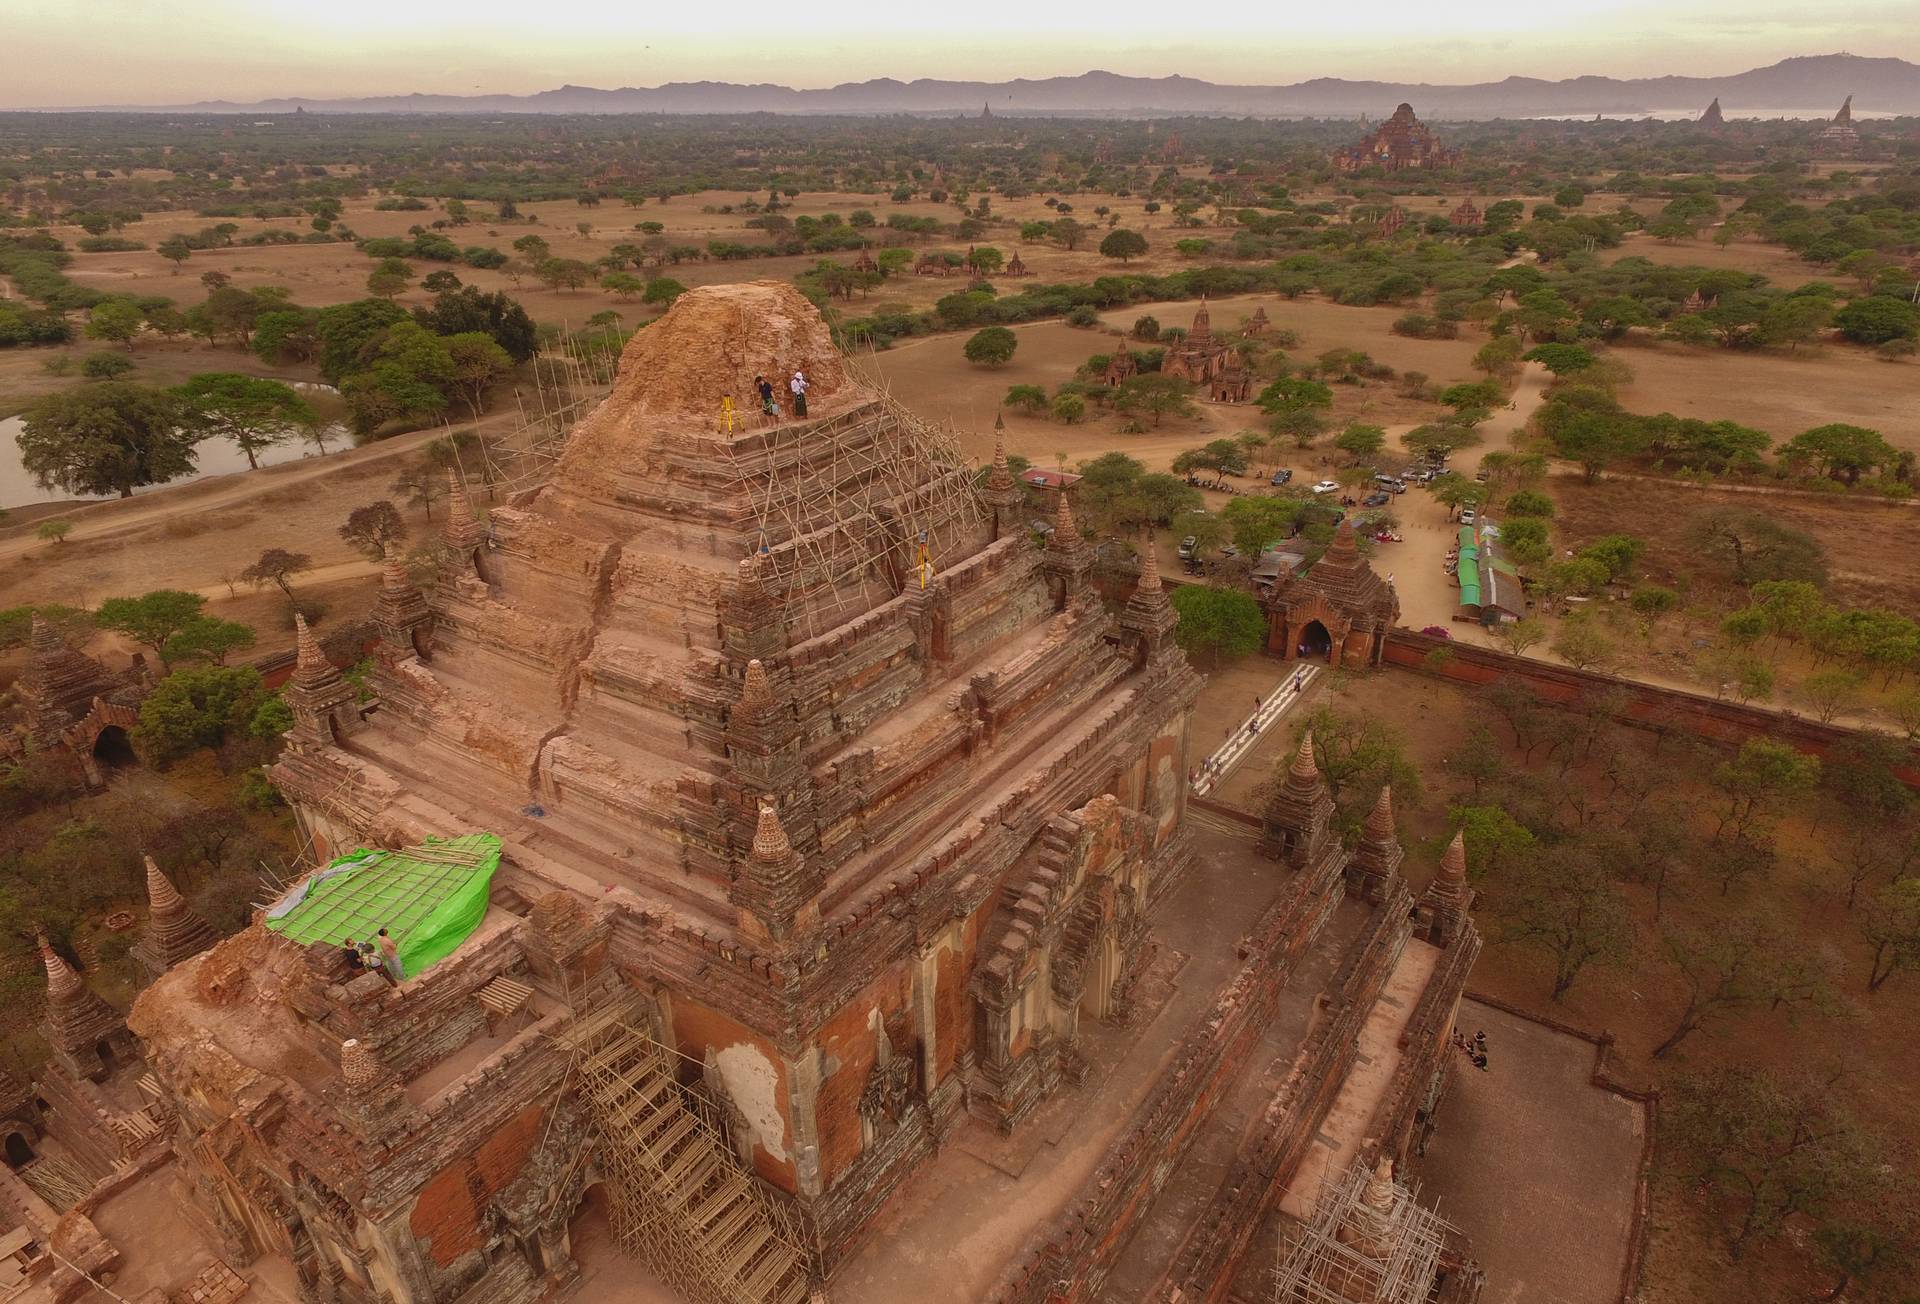 Sula-mani-gu-hpaya in Bagan, Myanmar, is one of 180 temples and pagodas that were damaged after an earthquake in 2016. A drone view helps the Zamani team to identify stable working platforms on the upper part of the monument. The temple lost its 15-metre tower, spire and part of the base.